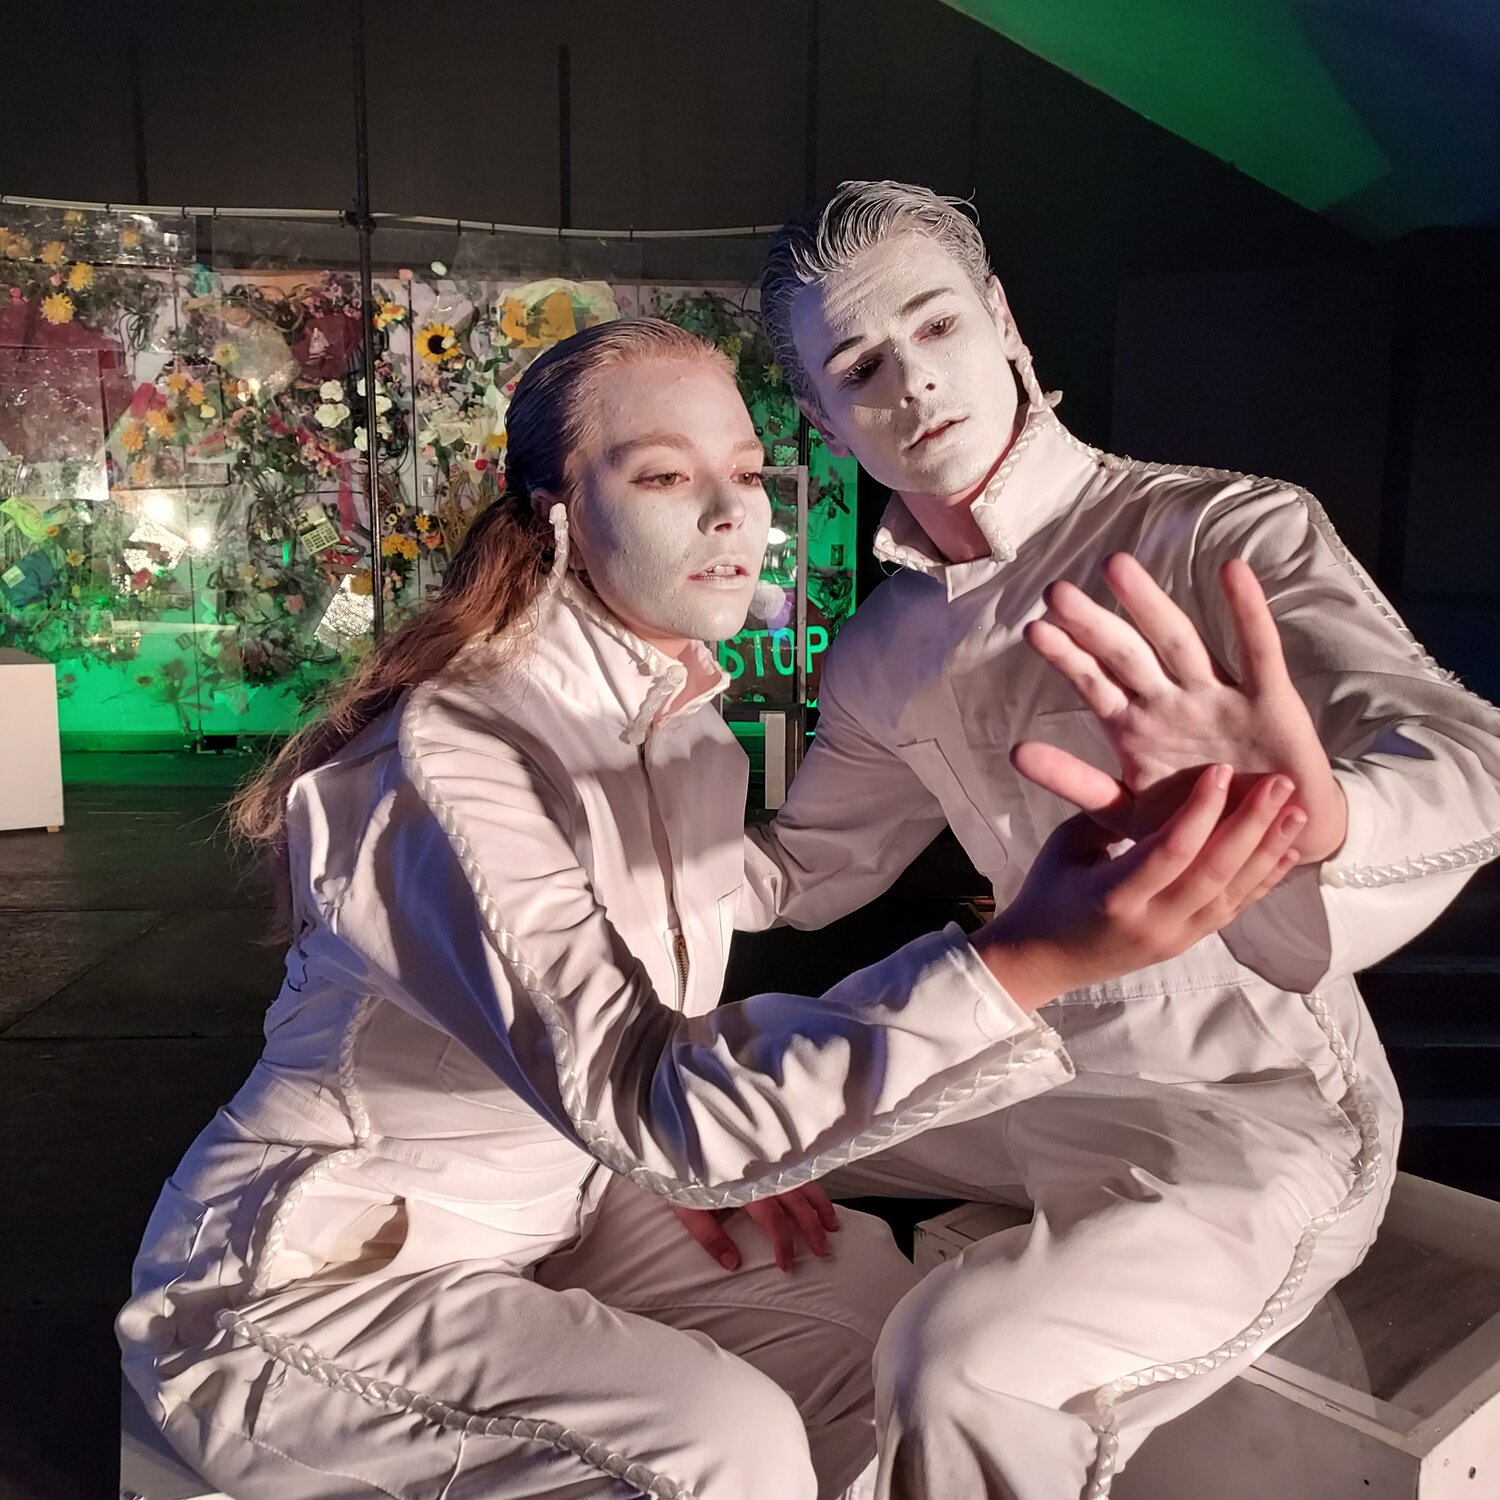 Actors Sophia Claire Smith and Will Thames gave stand-out performances in River Rep Theatre's "dystopian classic" "WE"  at the Delaware Valley Opera Center in Lake Huntington, NY.